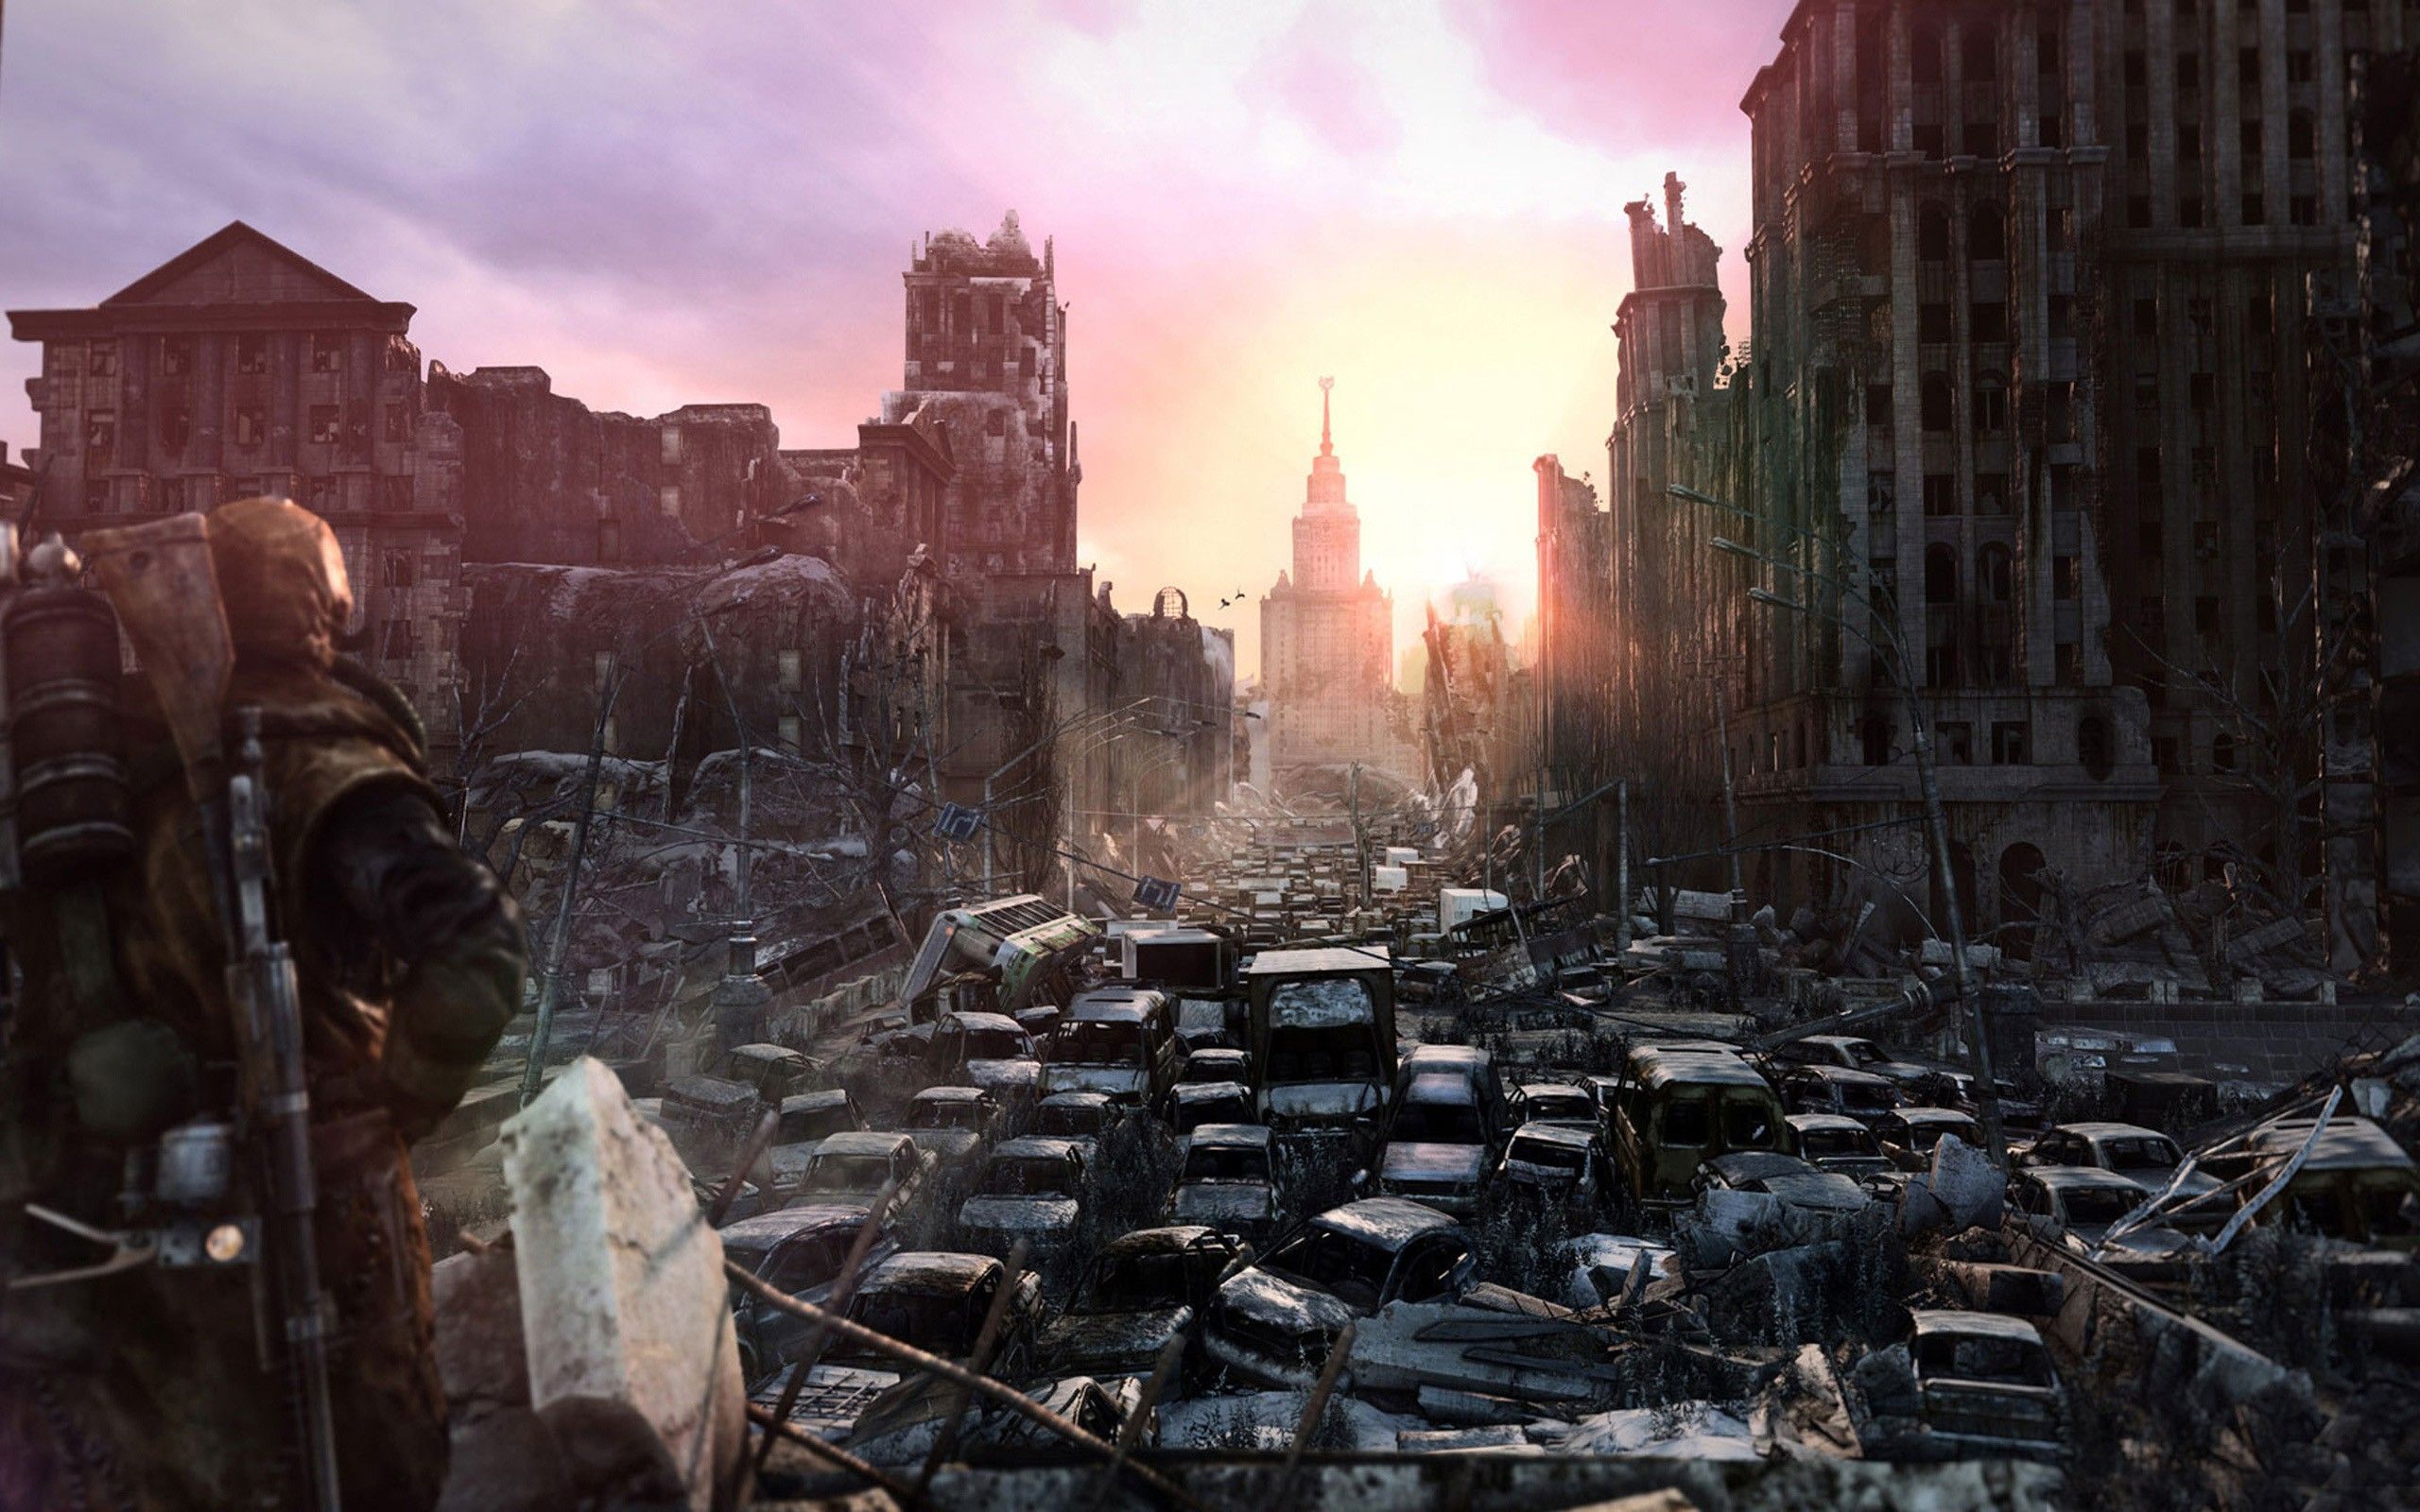 Gallery of 39 Destruction Background, Wallpaper. B.SCB WP&BG Collection